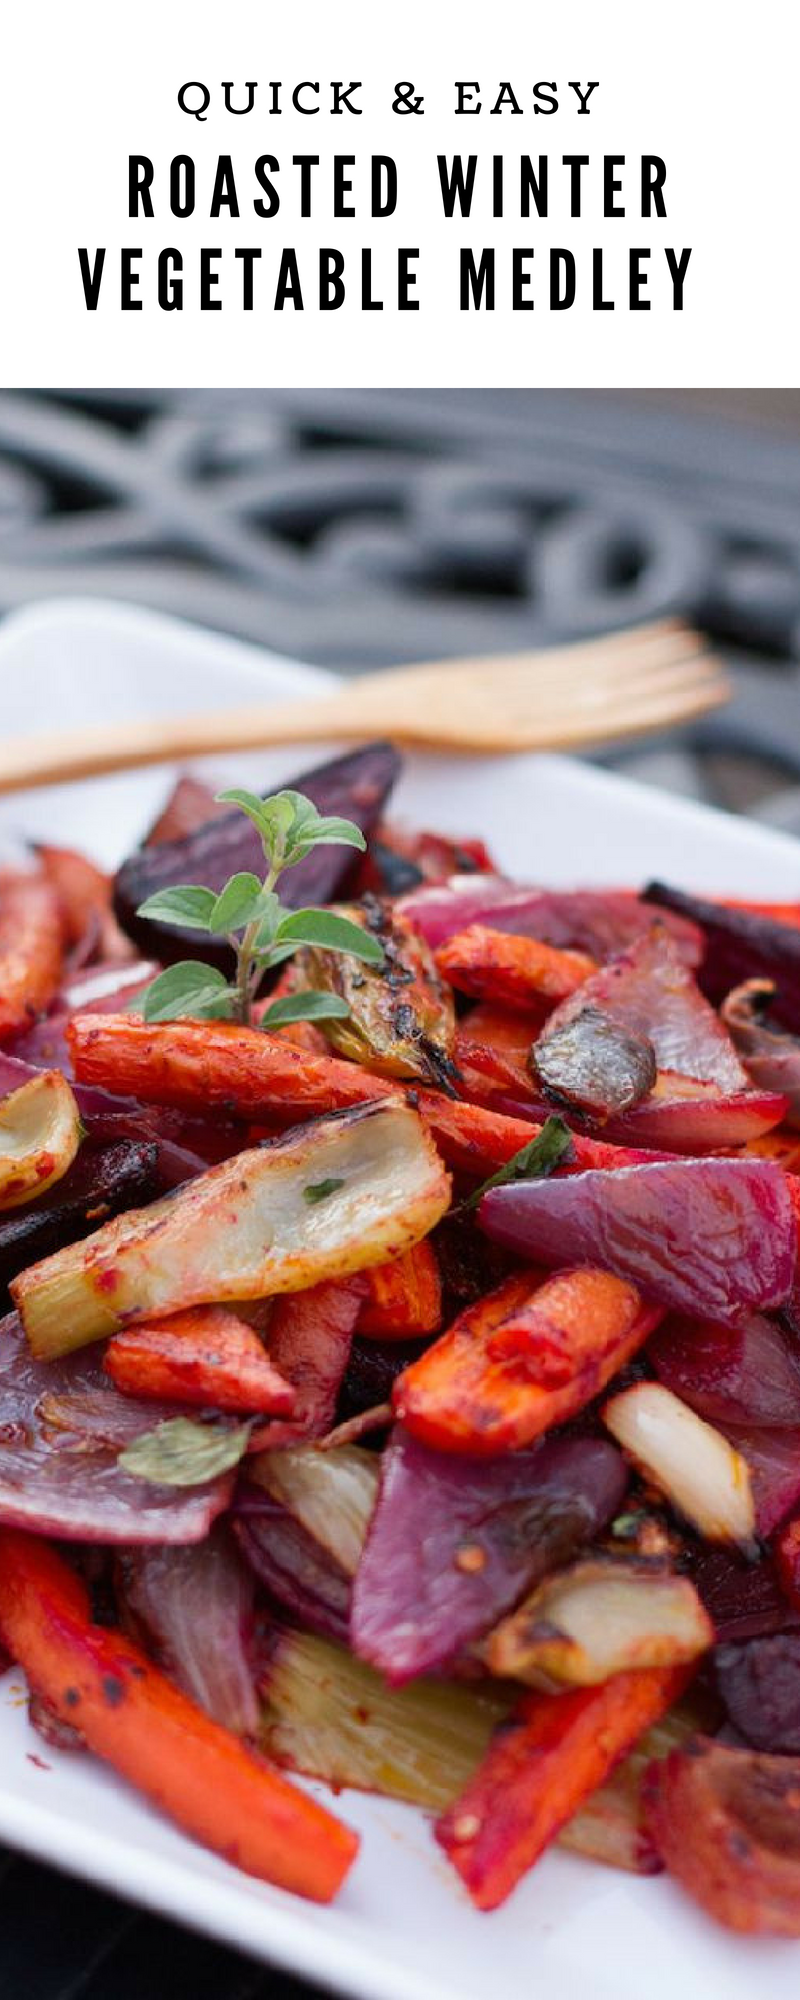 Quick + Easy Roasted Winter Vegetable Medley